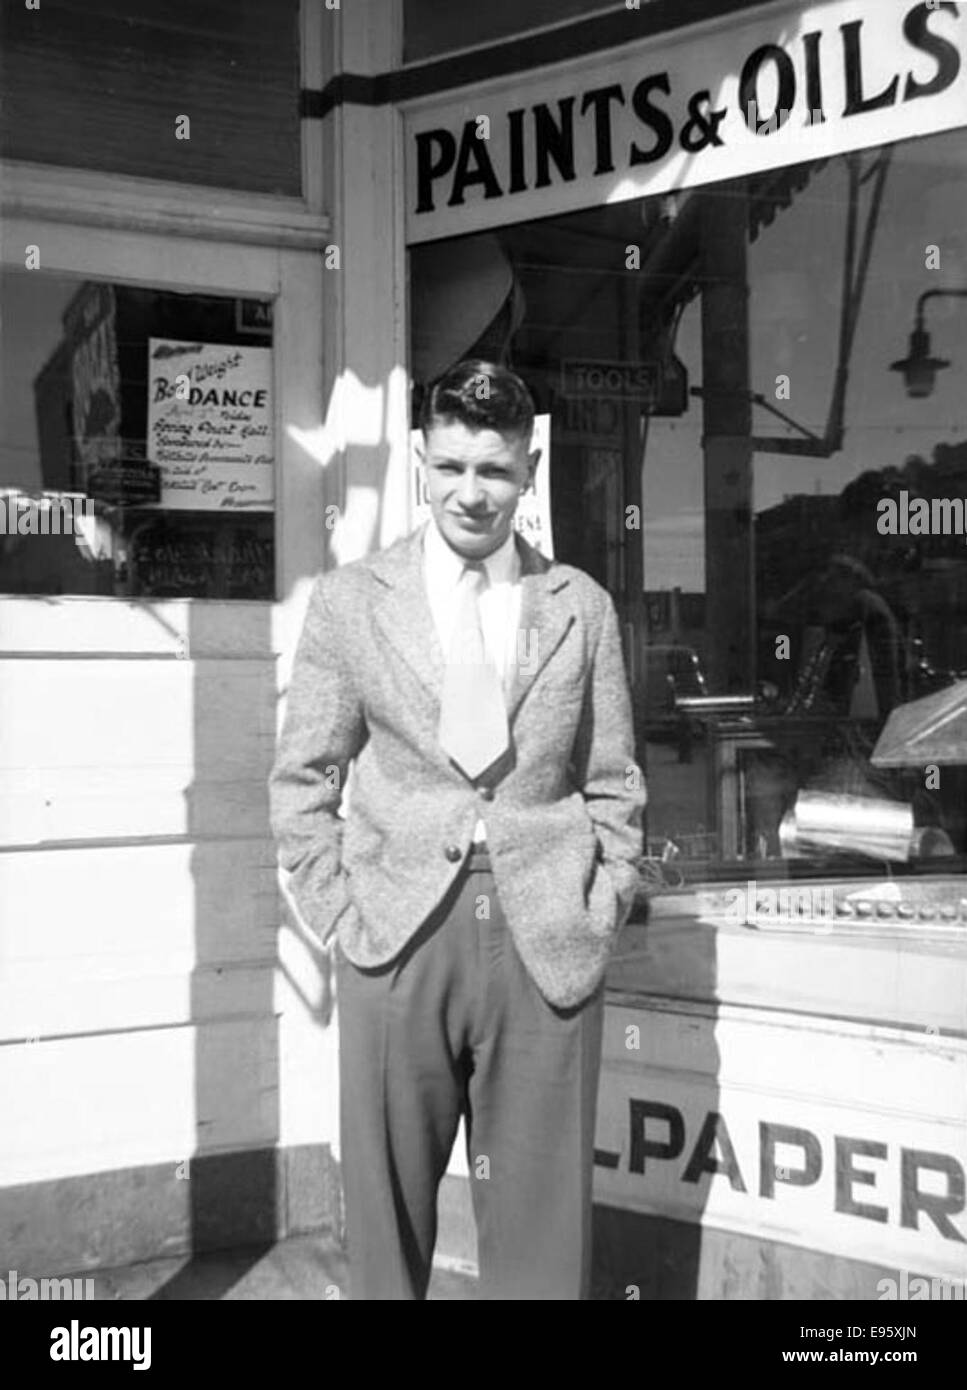 A young man posing in front of a store window; sign “Paints &amp; Oils” behind. March 1948 21/4 x 31/4 negative This is one of 54 photos in the album “Fort Macleod’s Anonymous”. Most are shot in Fort Macleod, Stock Photo